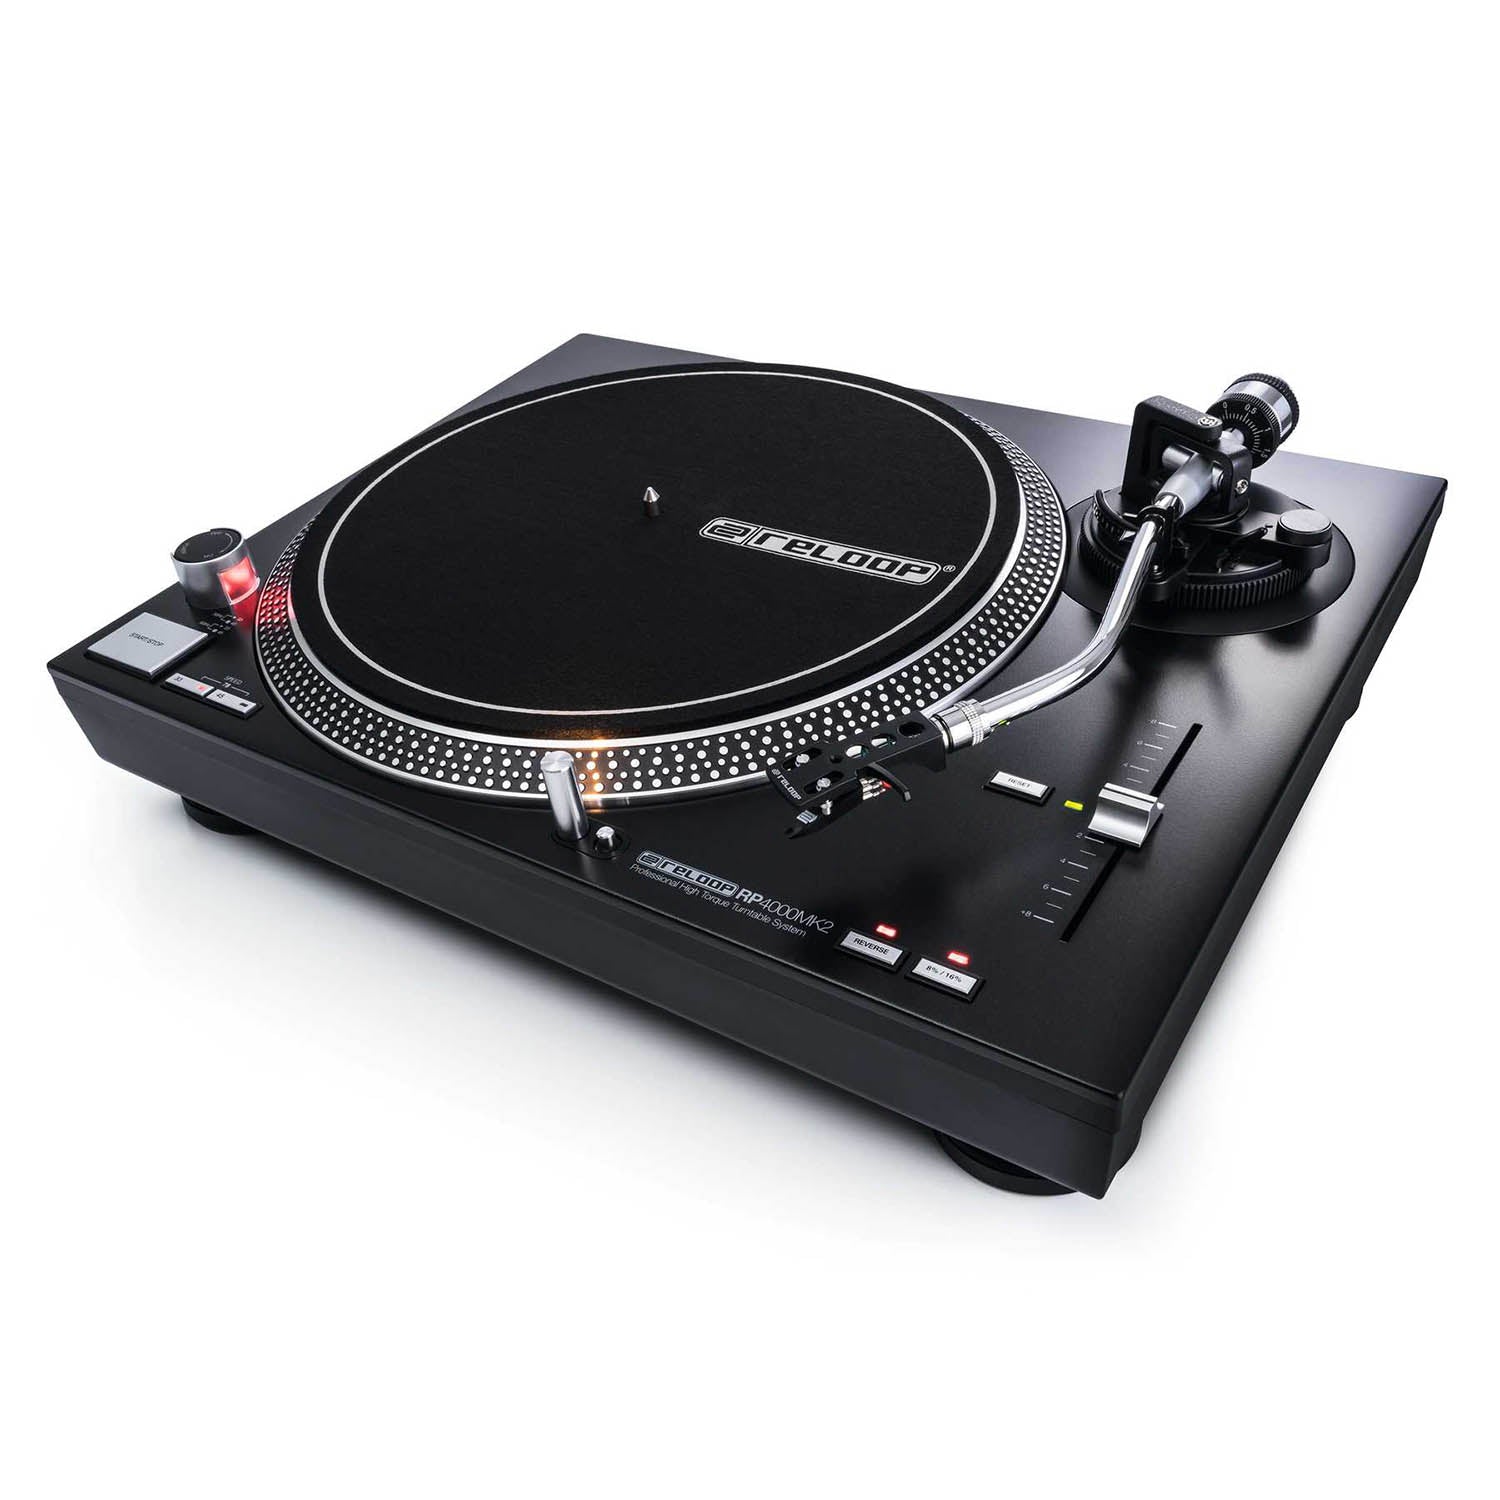 B-Stock: Reloop RP-4000-MK2, Professional High-Torque Turntable System - Hollywood DJ